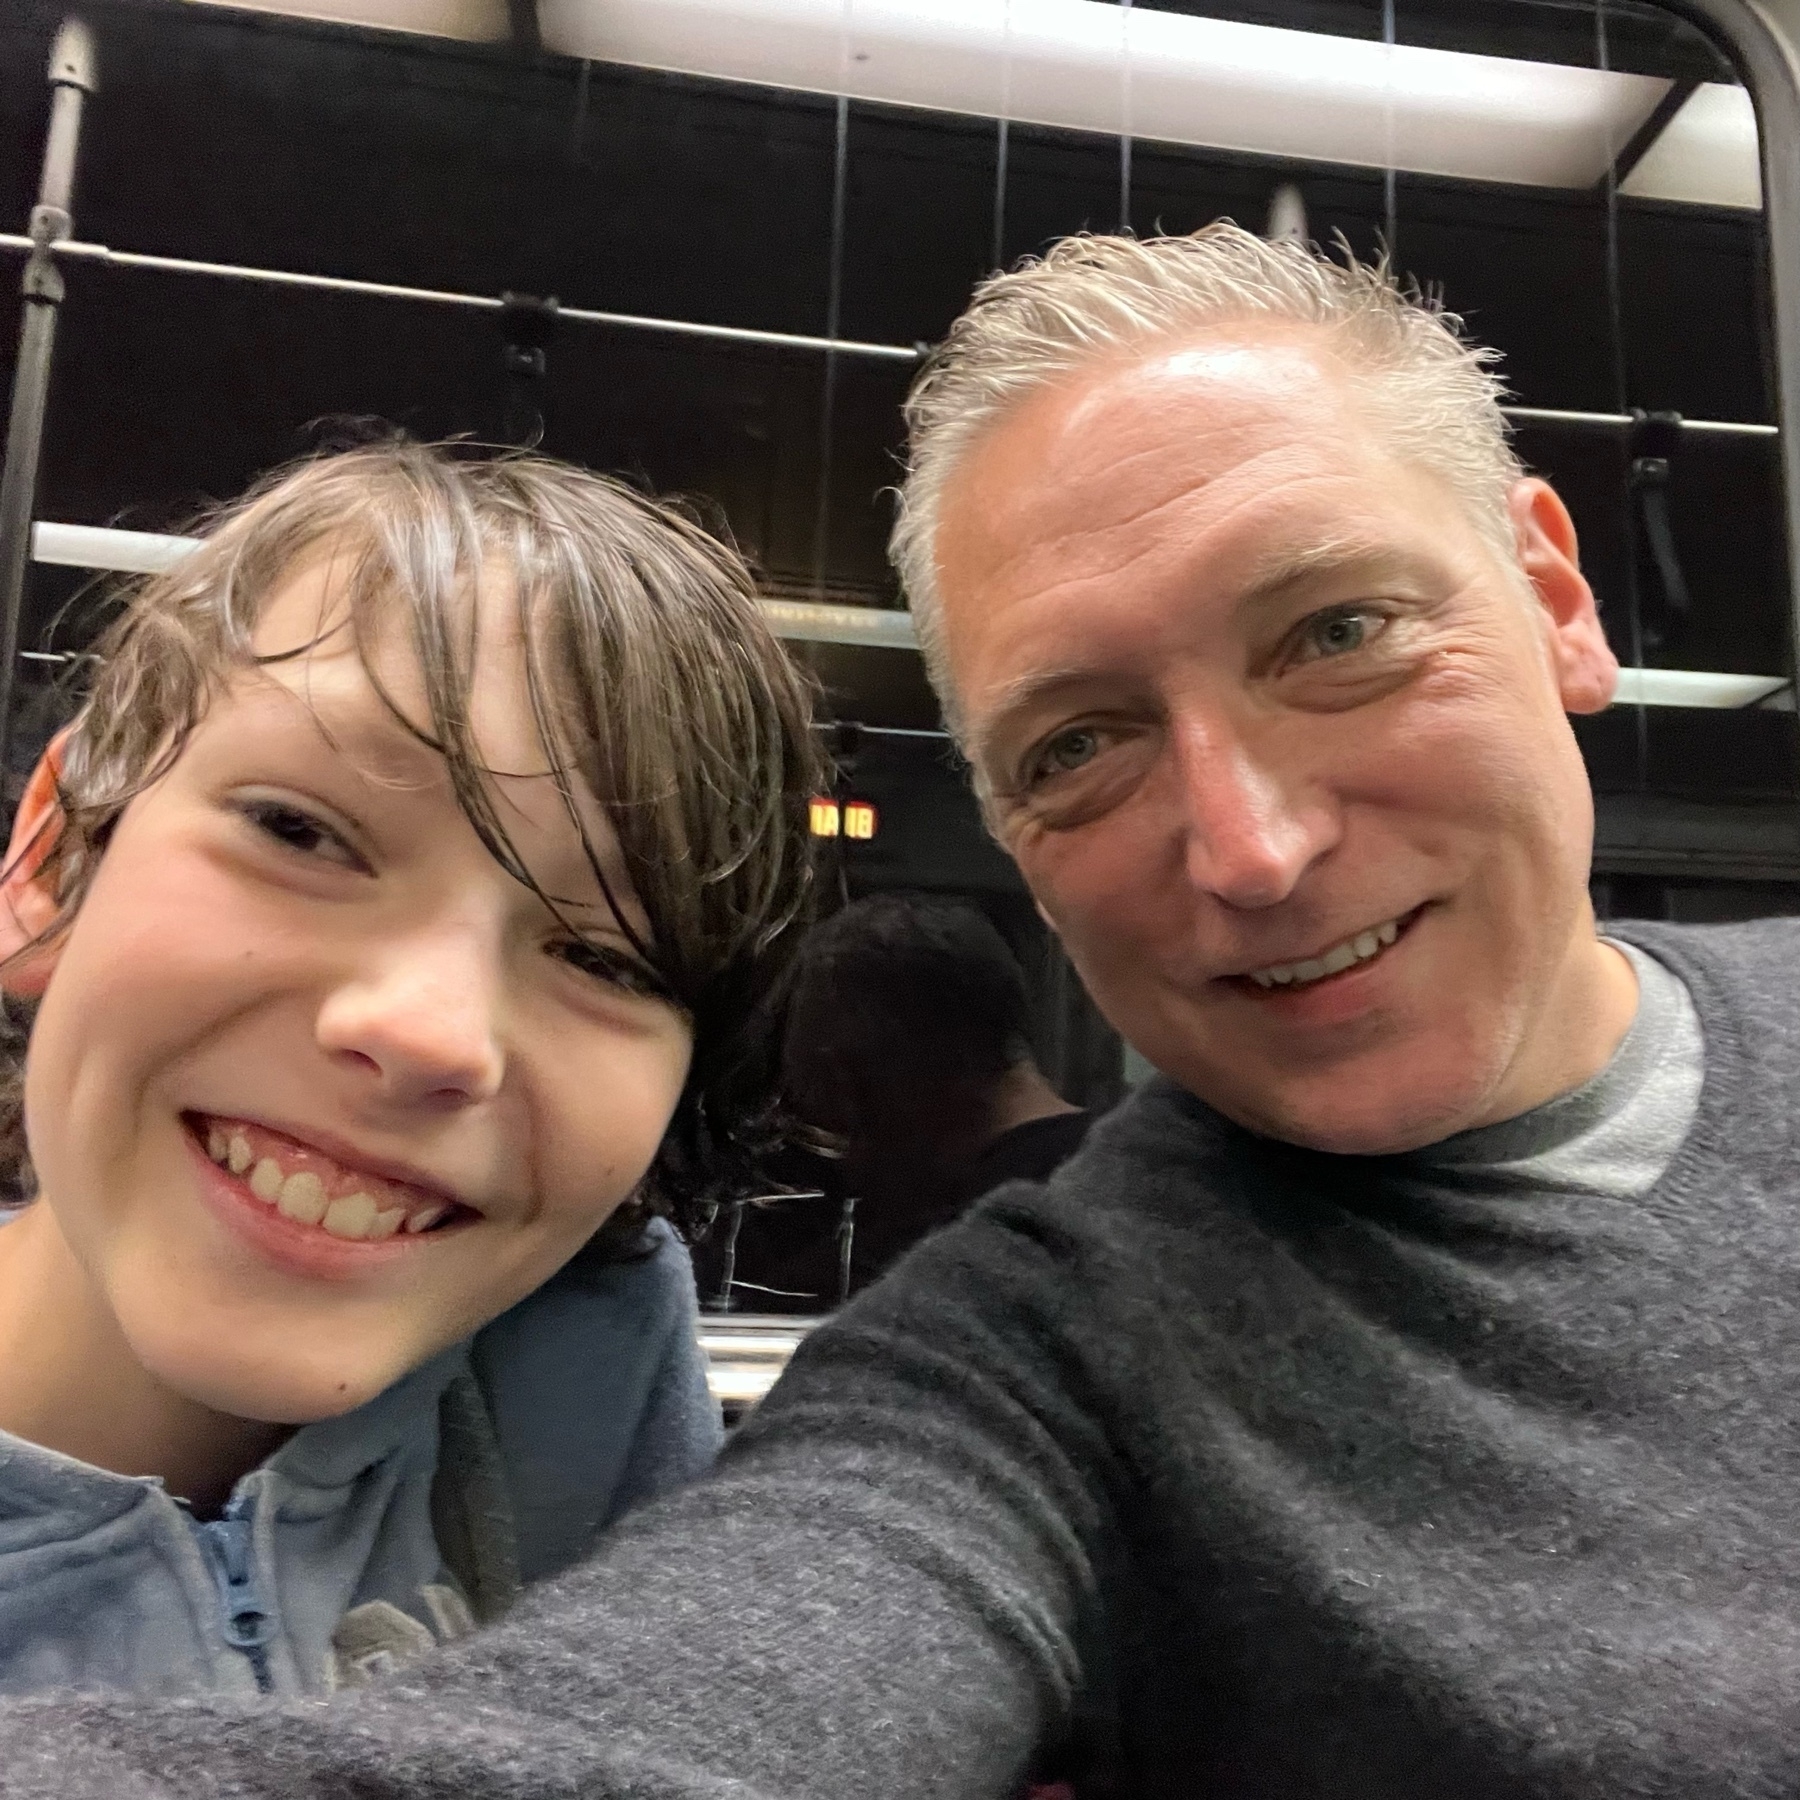 Selfie of me and my 11yo boy in a subway car.